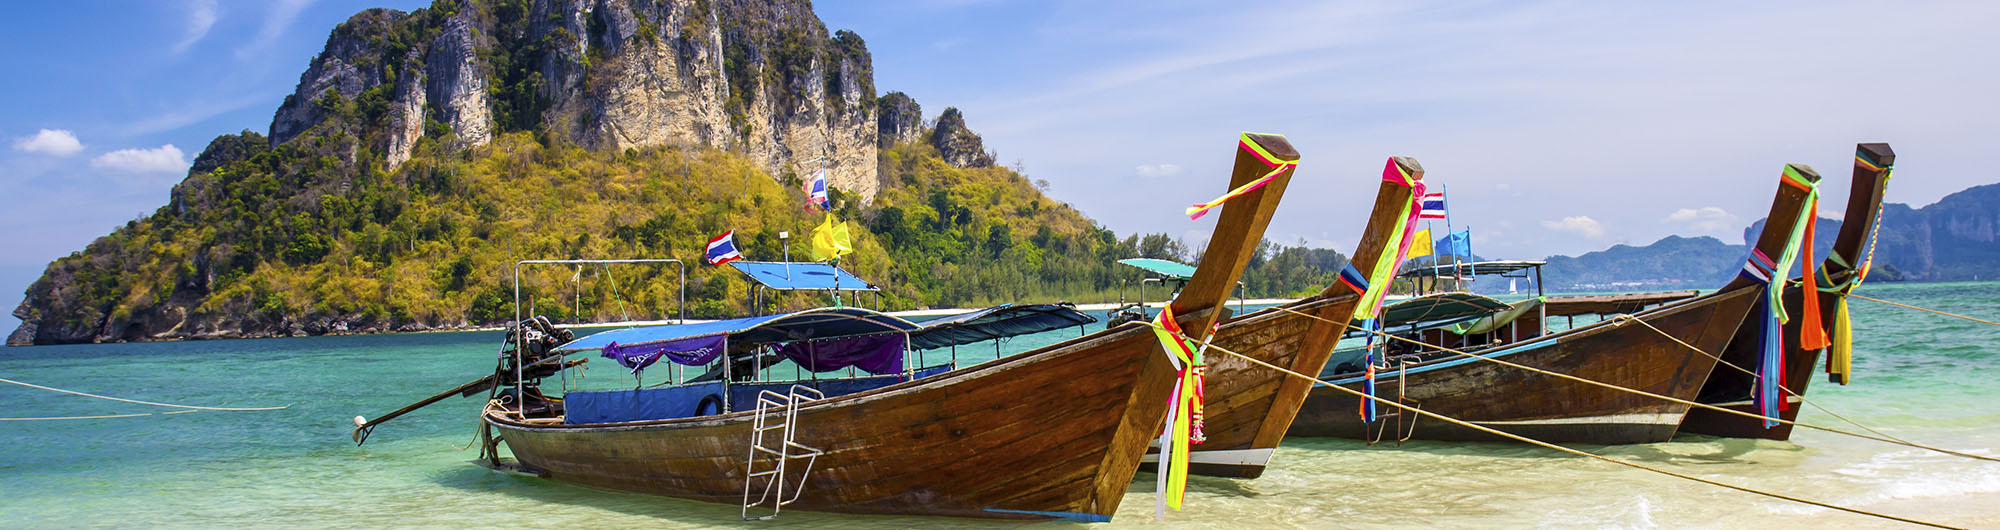 Search and compare cheap flights from Bangkok to Krabi